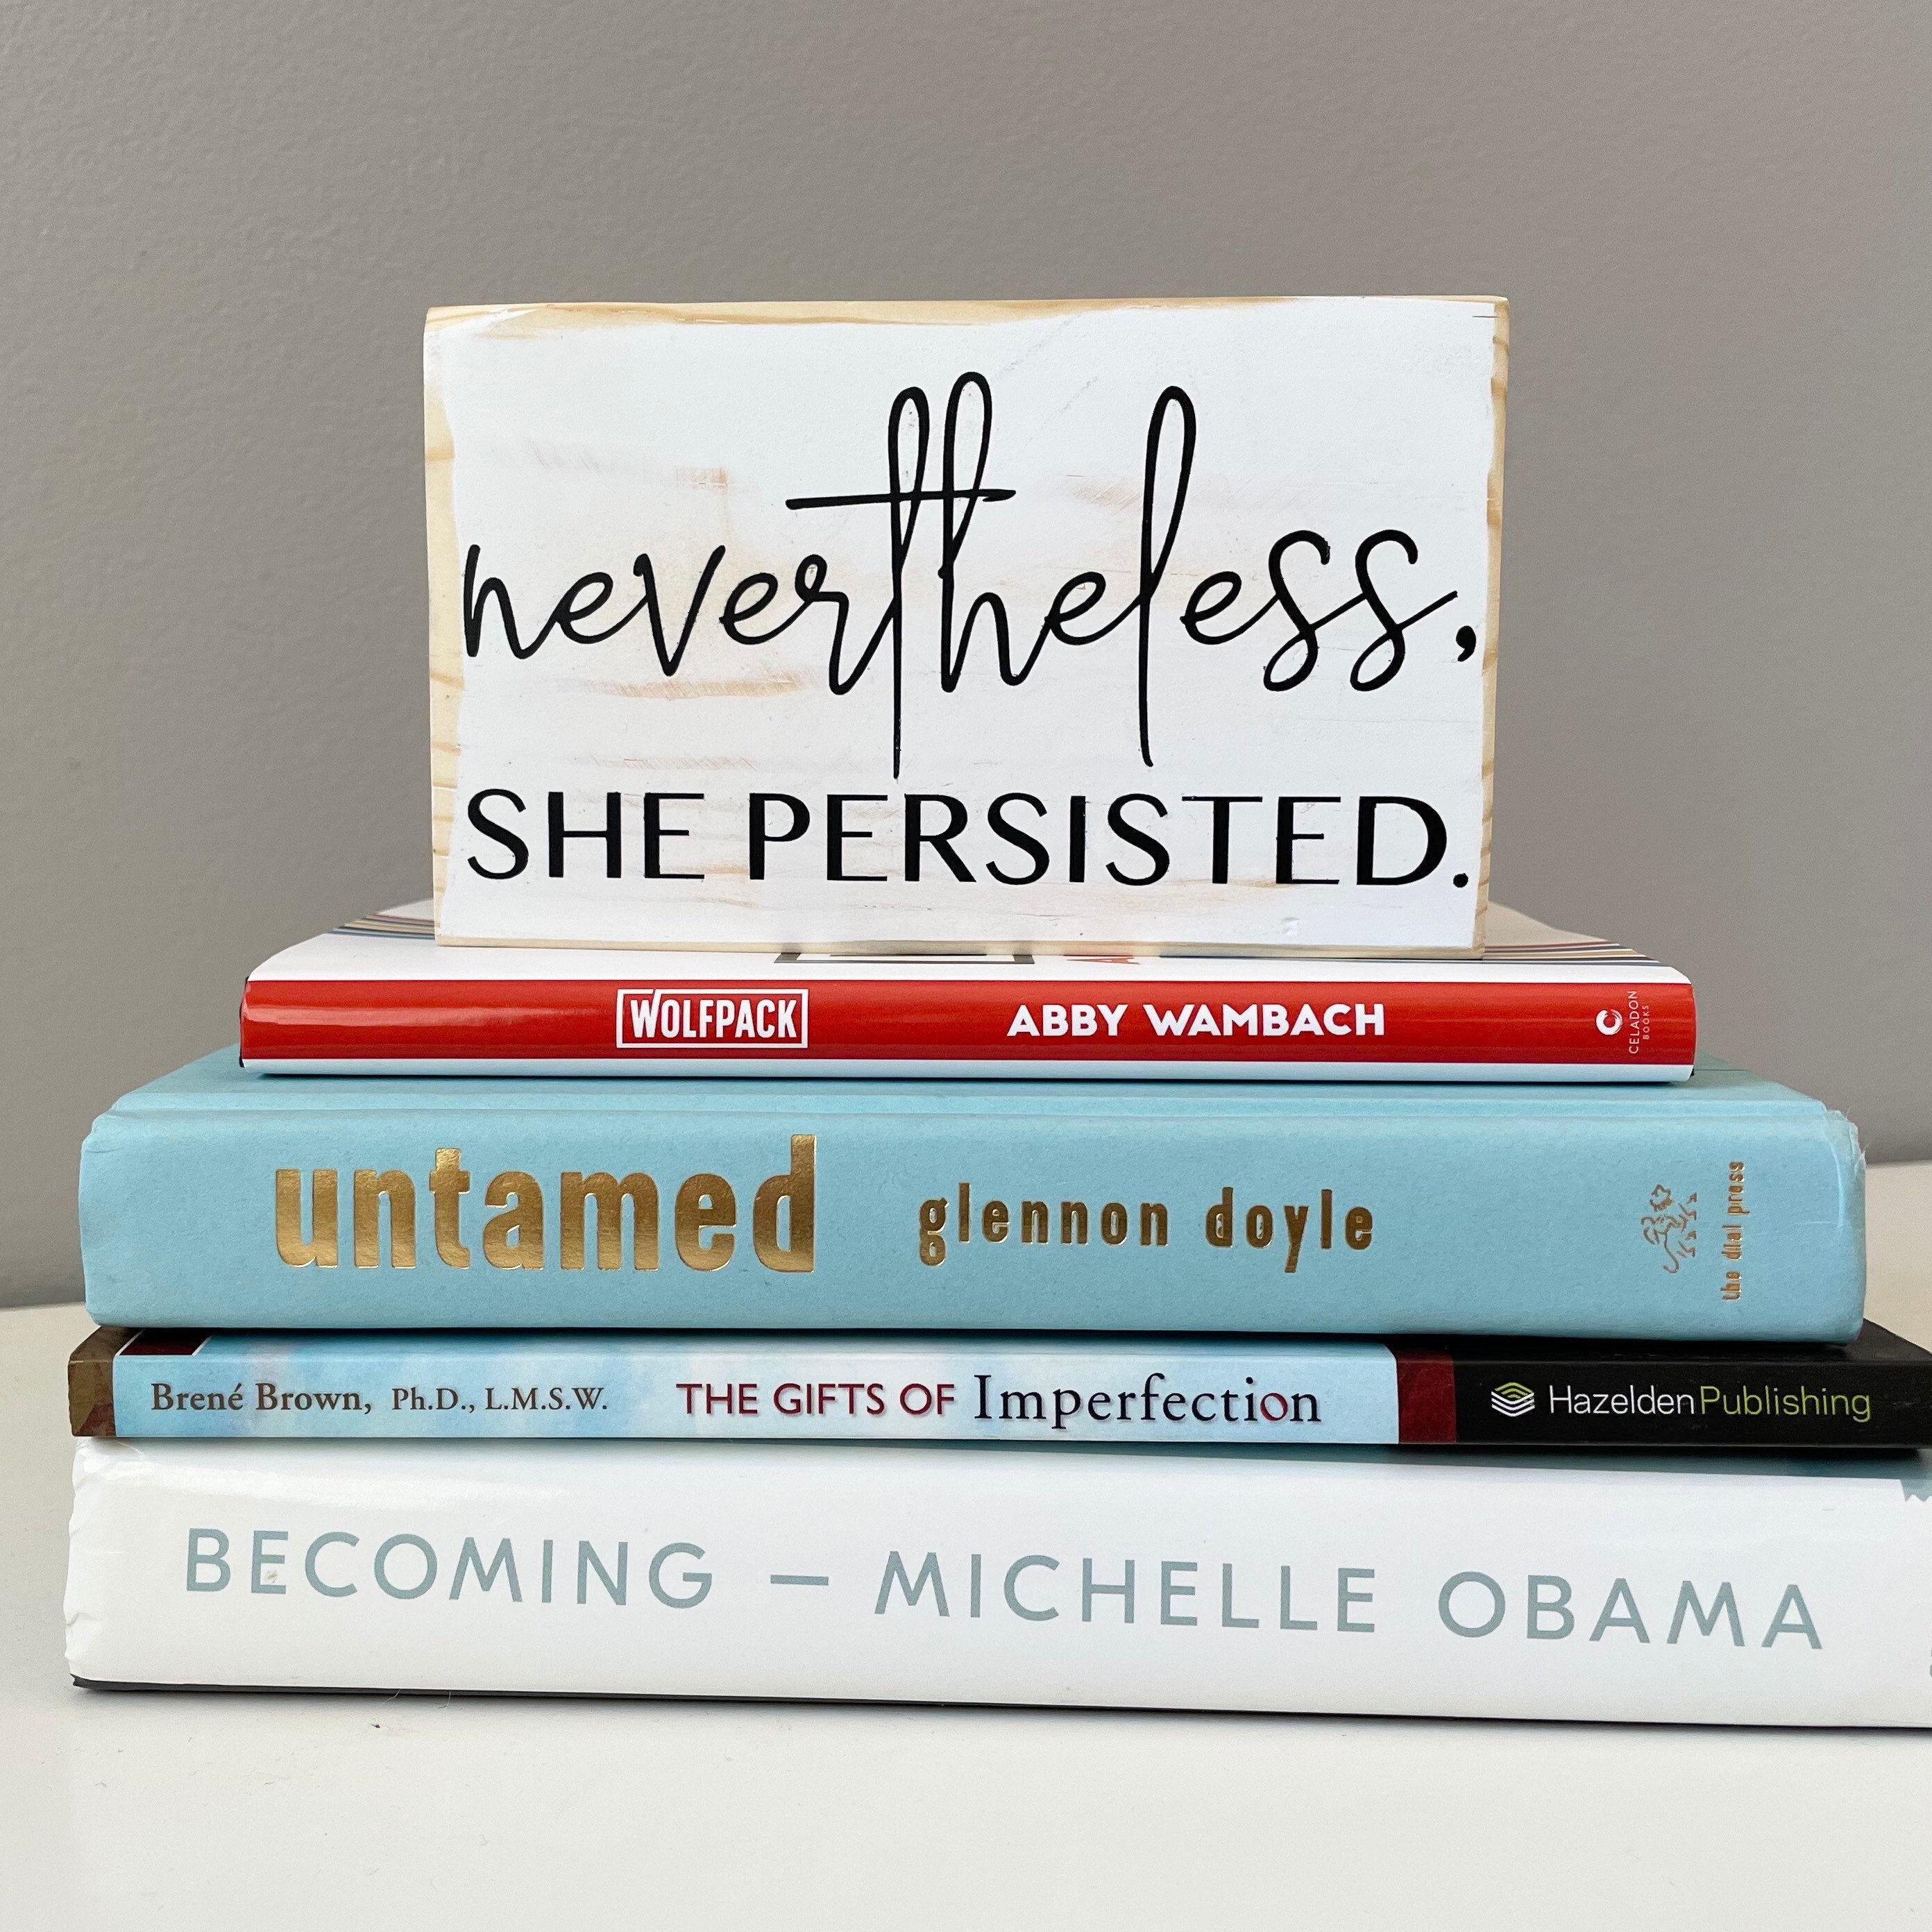 small rectangular wood sign painted white with black lettering that reads "Nevertheless, she persisted." Nevertheless is in script. She persisted is below it in all caps. 